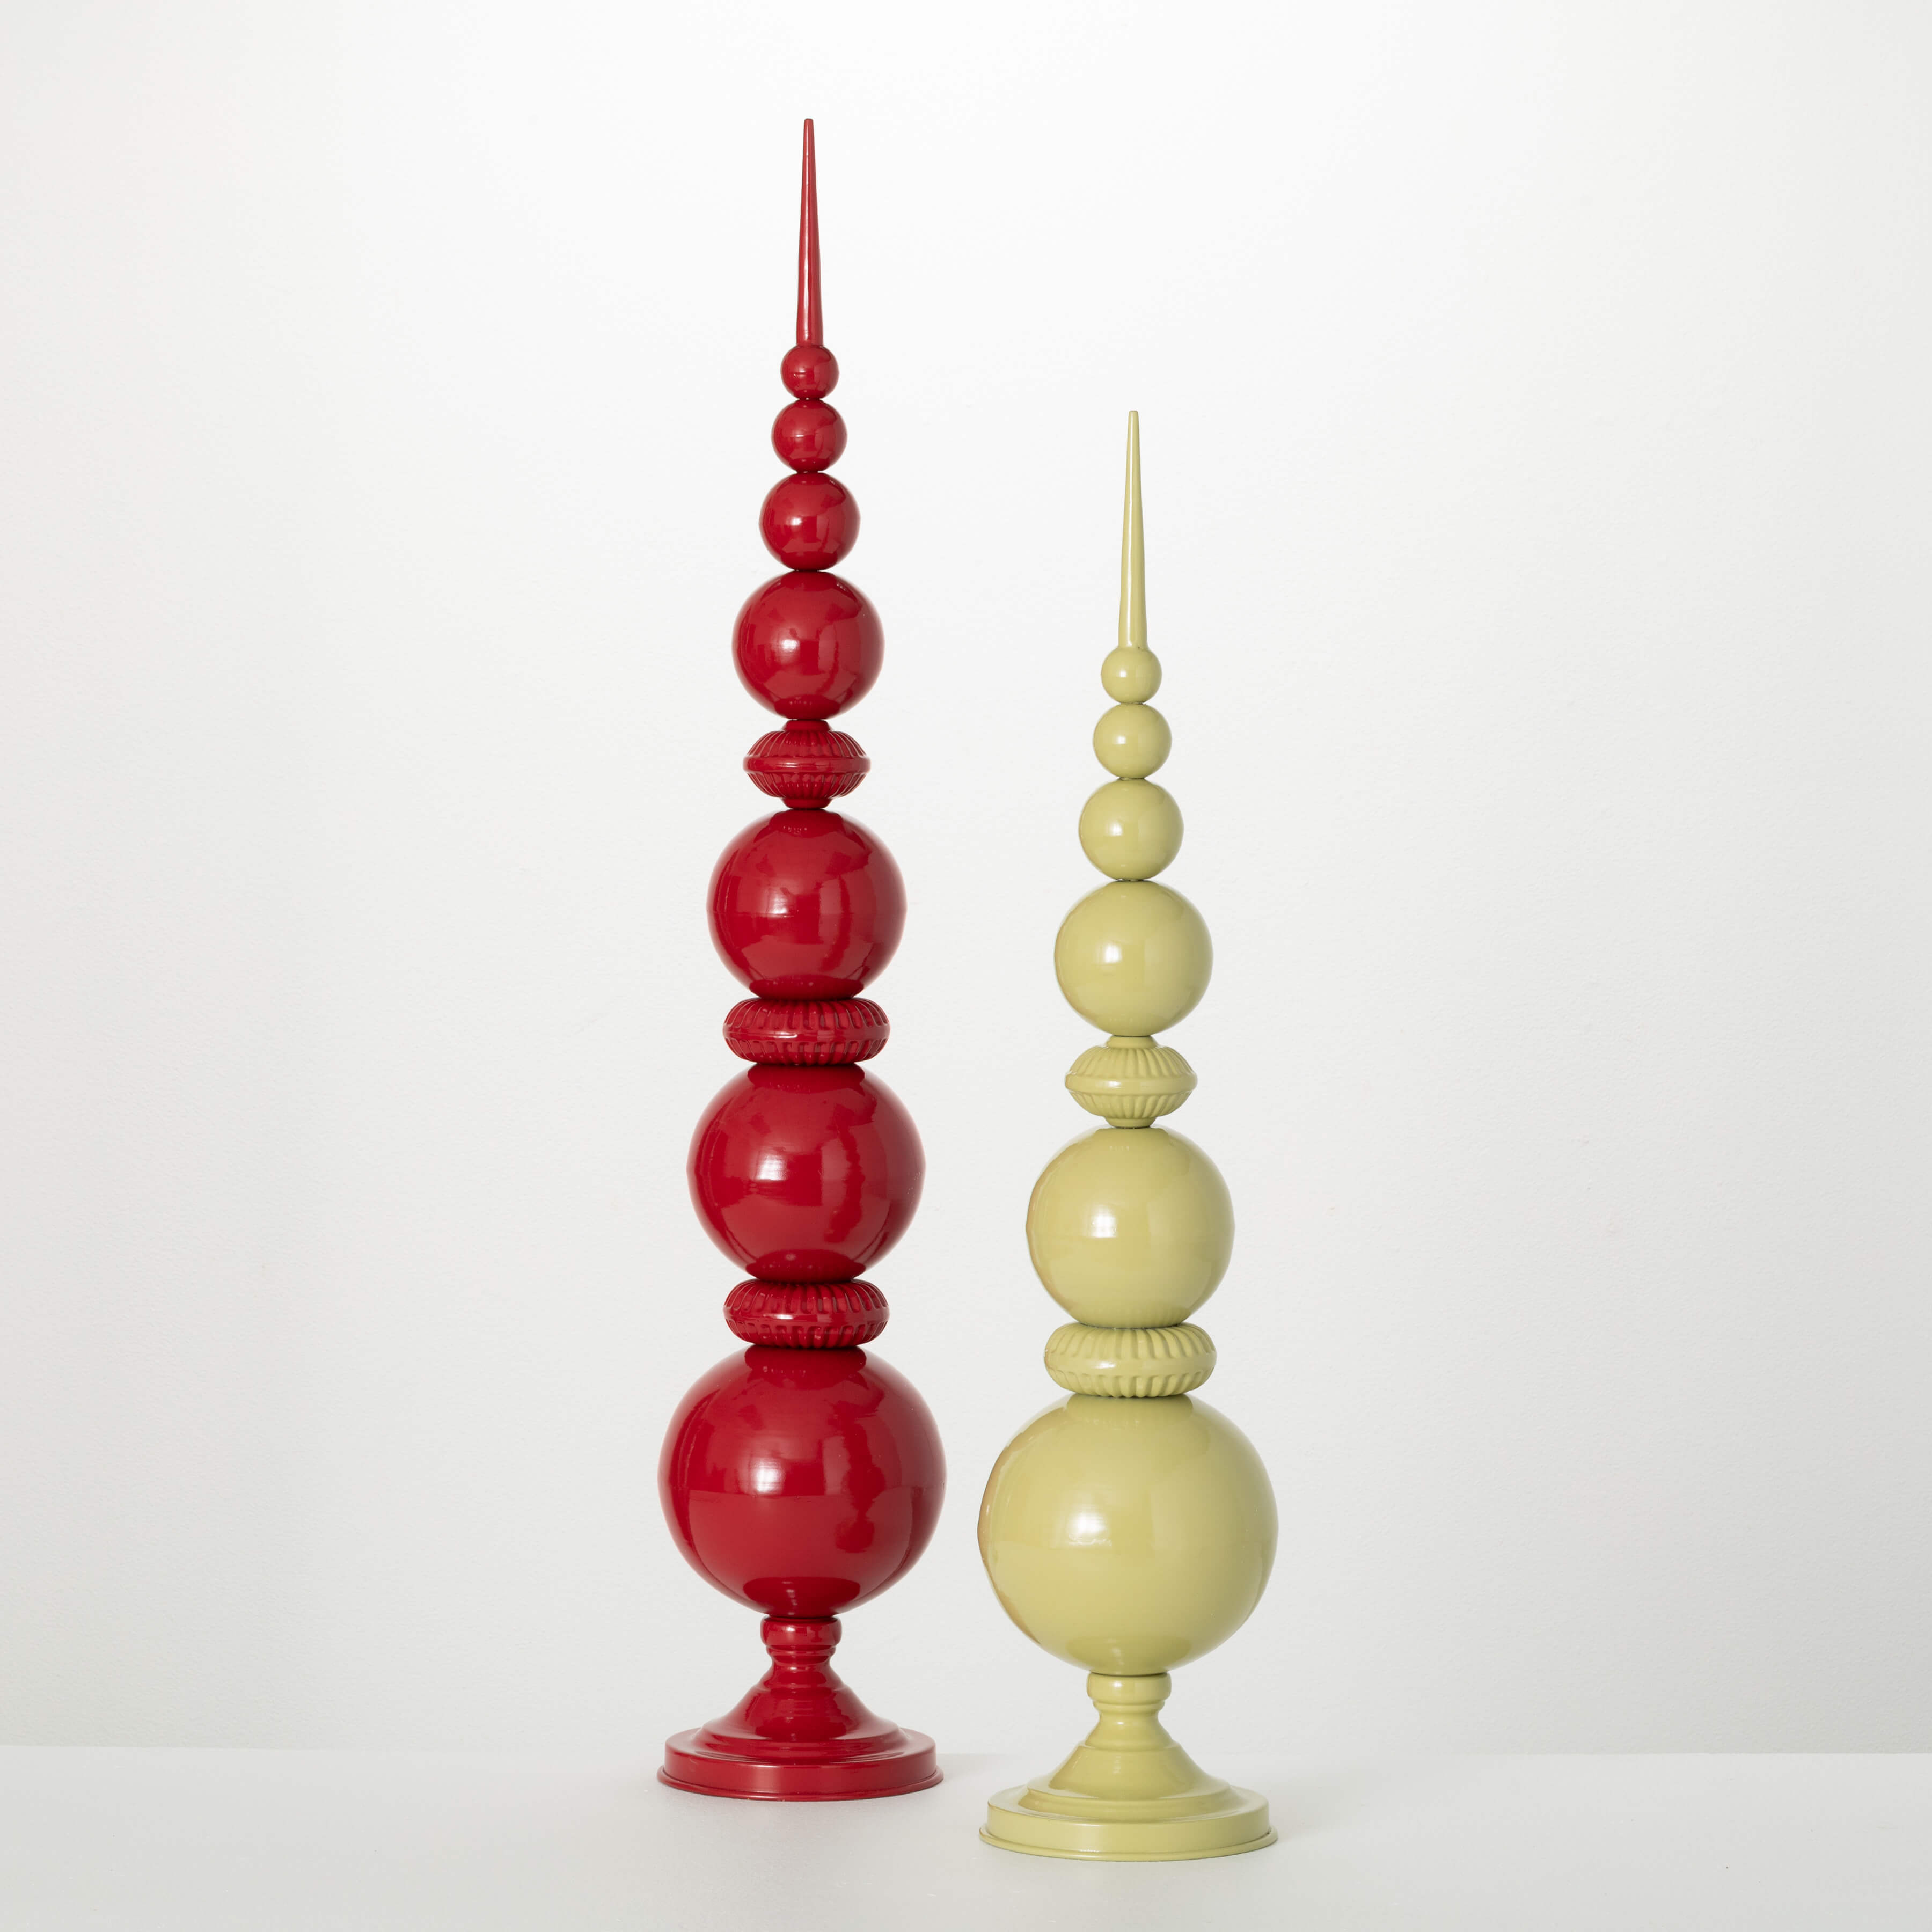 RED GREEN FINIAL FIGURINES